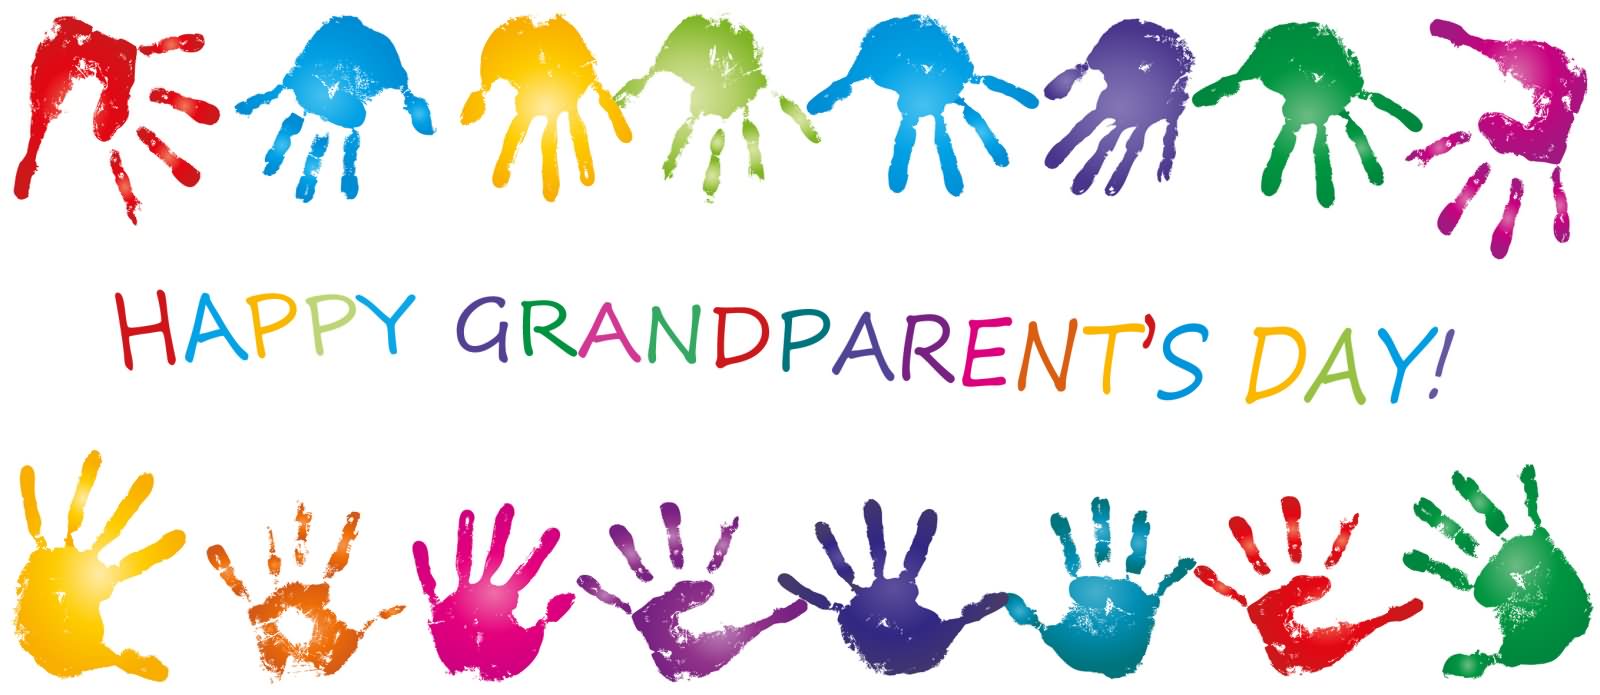 Download 50 Best Grandparents Day Wish Pictures And Images